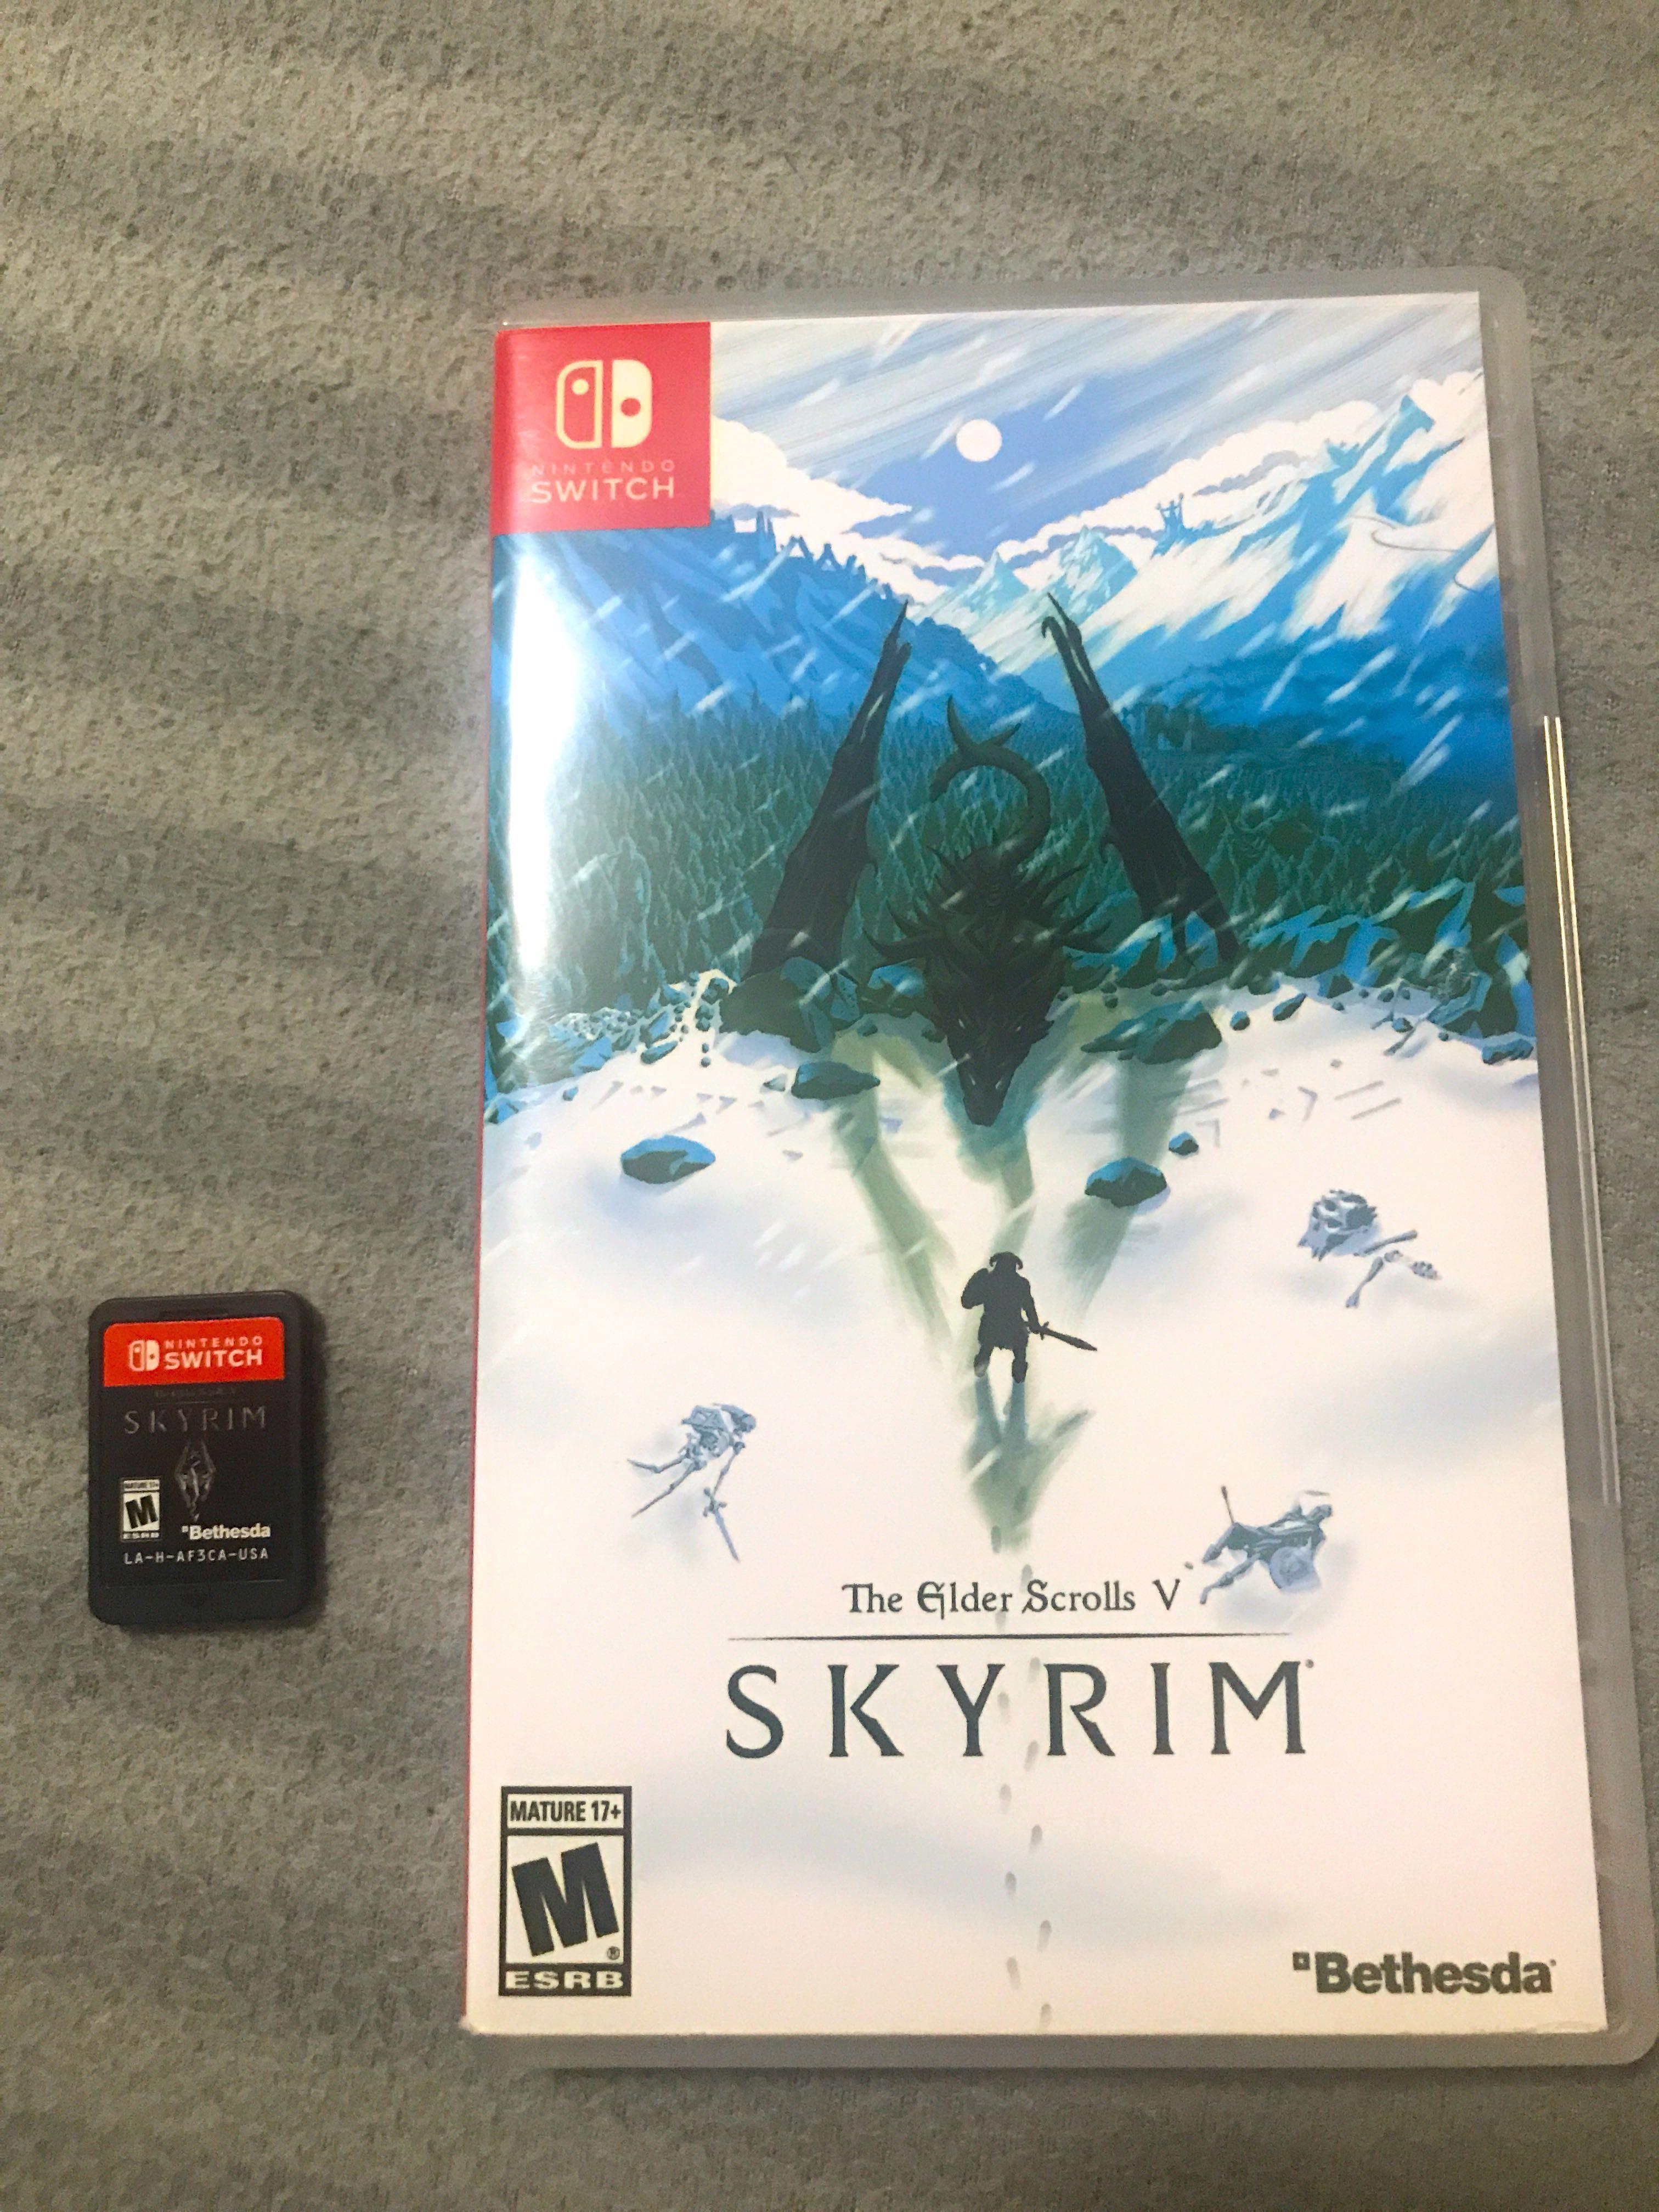 does skyrim for the switch come with all dlc